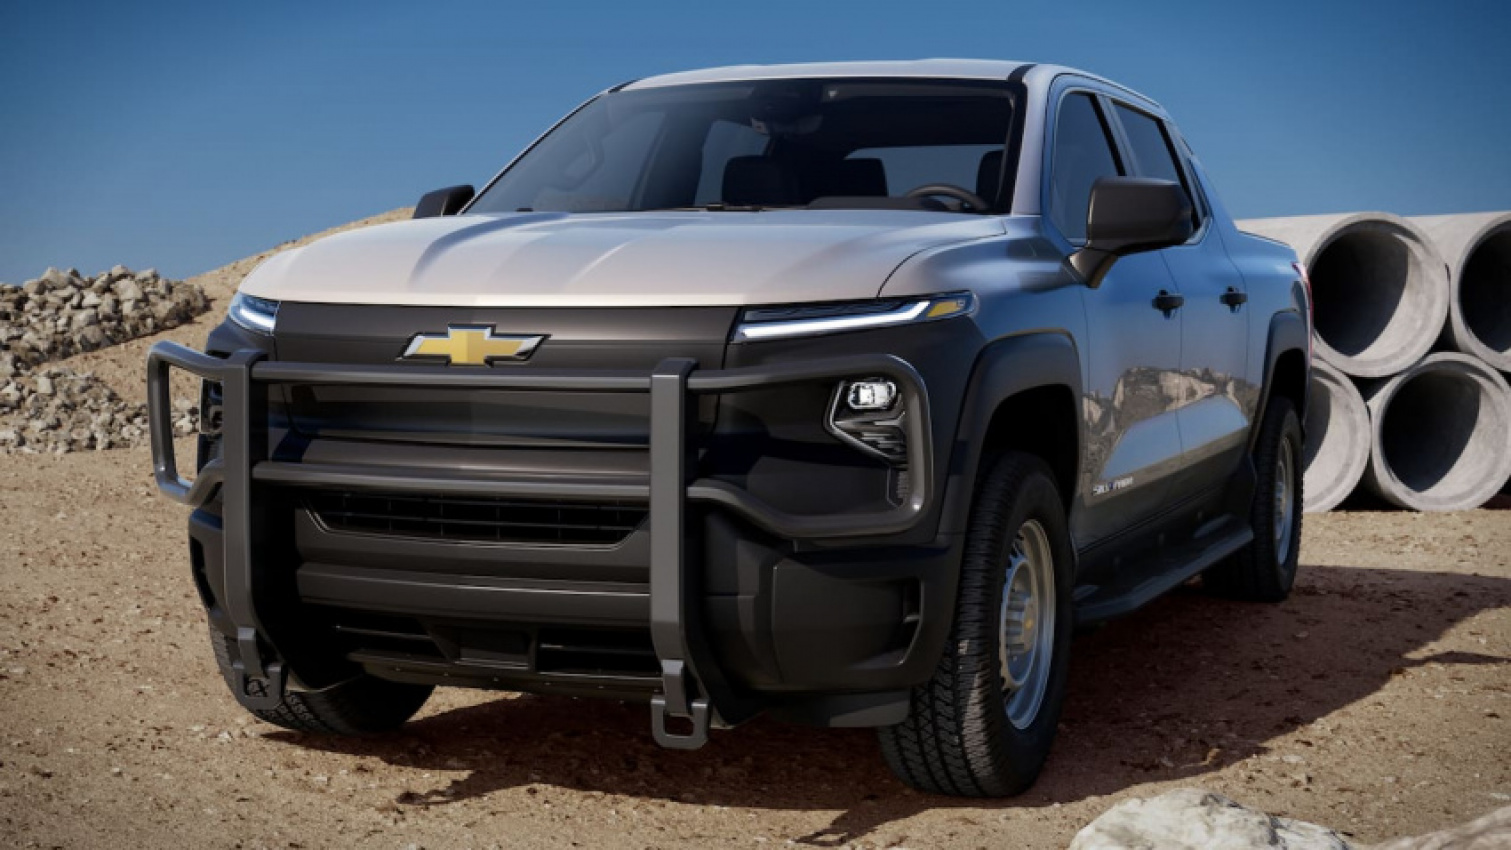 autos, cars, chevrolet, electric vehicle, chevrolet silverado, chevrolet silverado ev work truck, chevrolet silverado ev work truck (wt): everything we know as of apr 2022